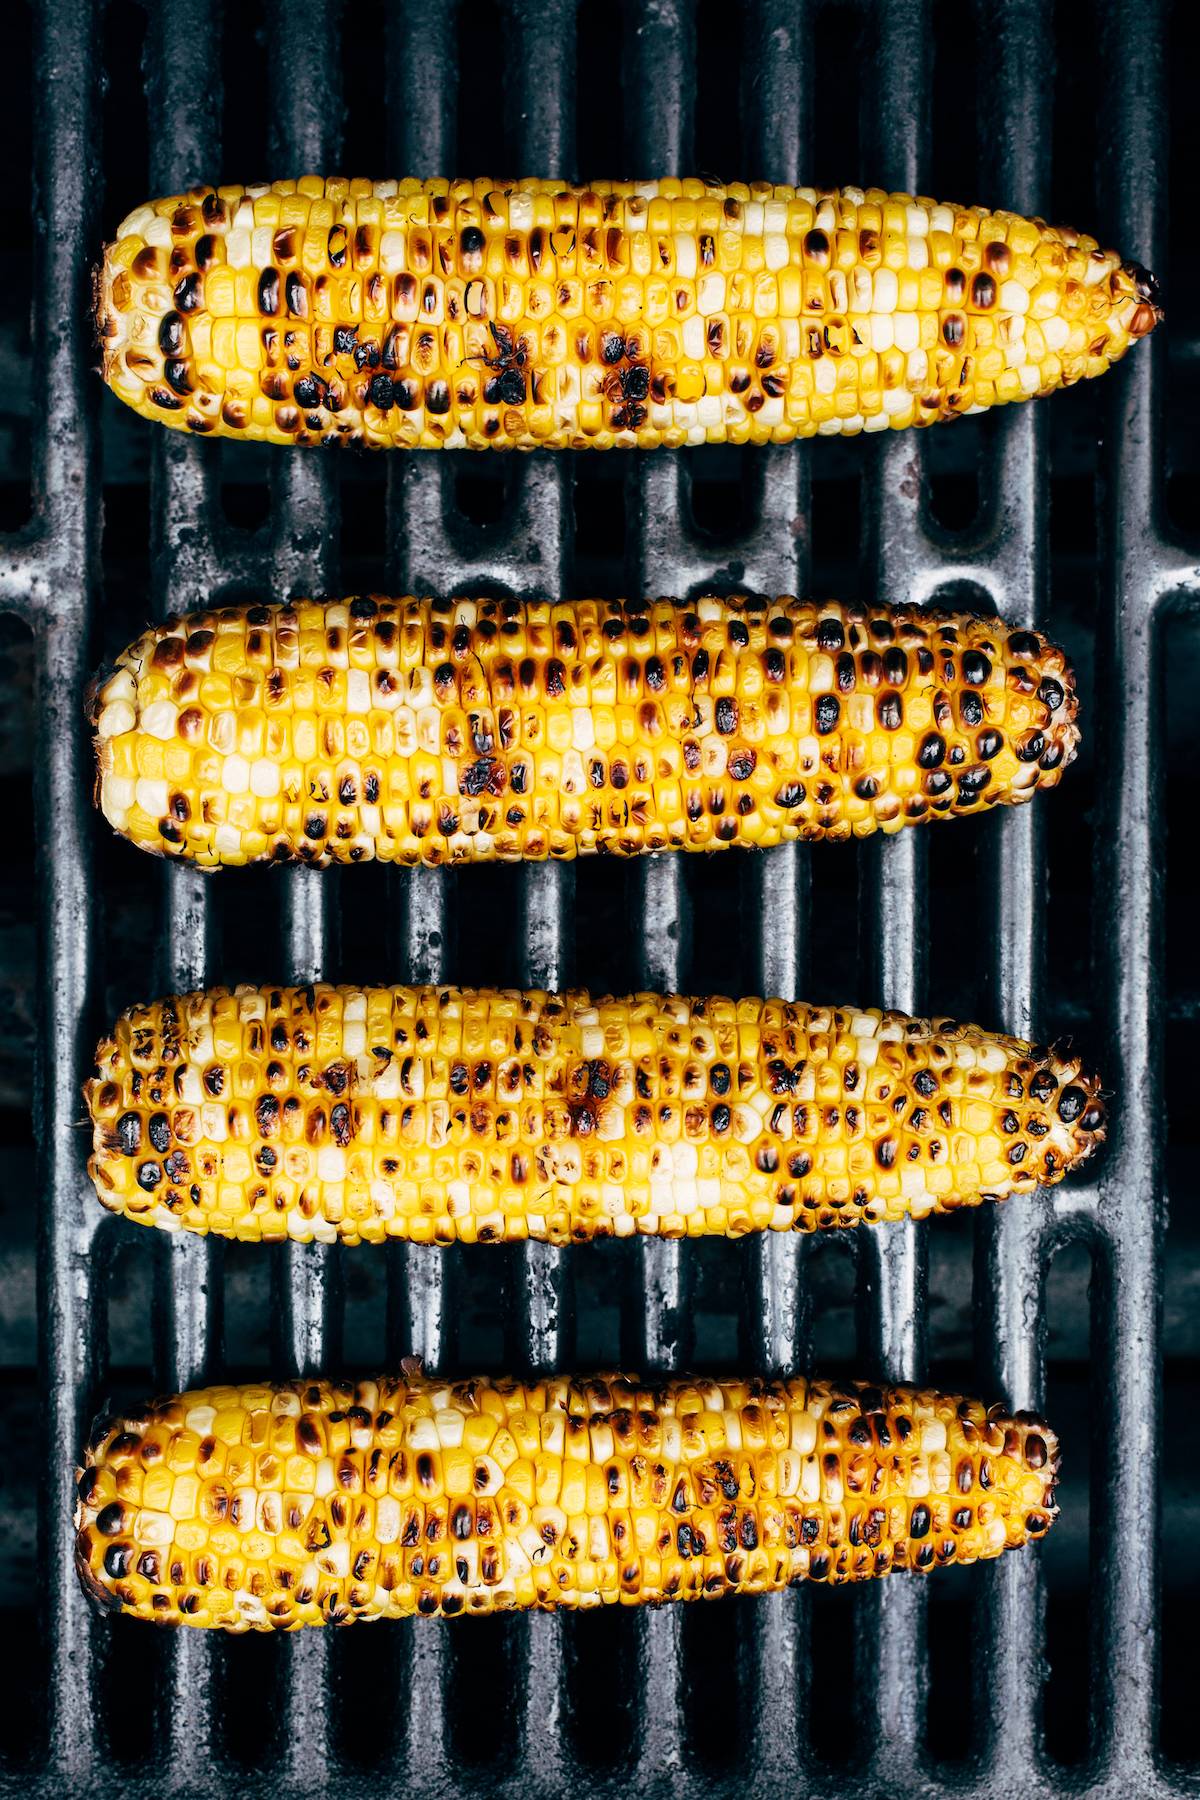 Four ears of corn directly on grill grates.